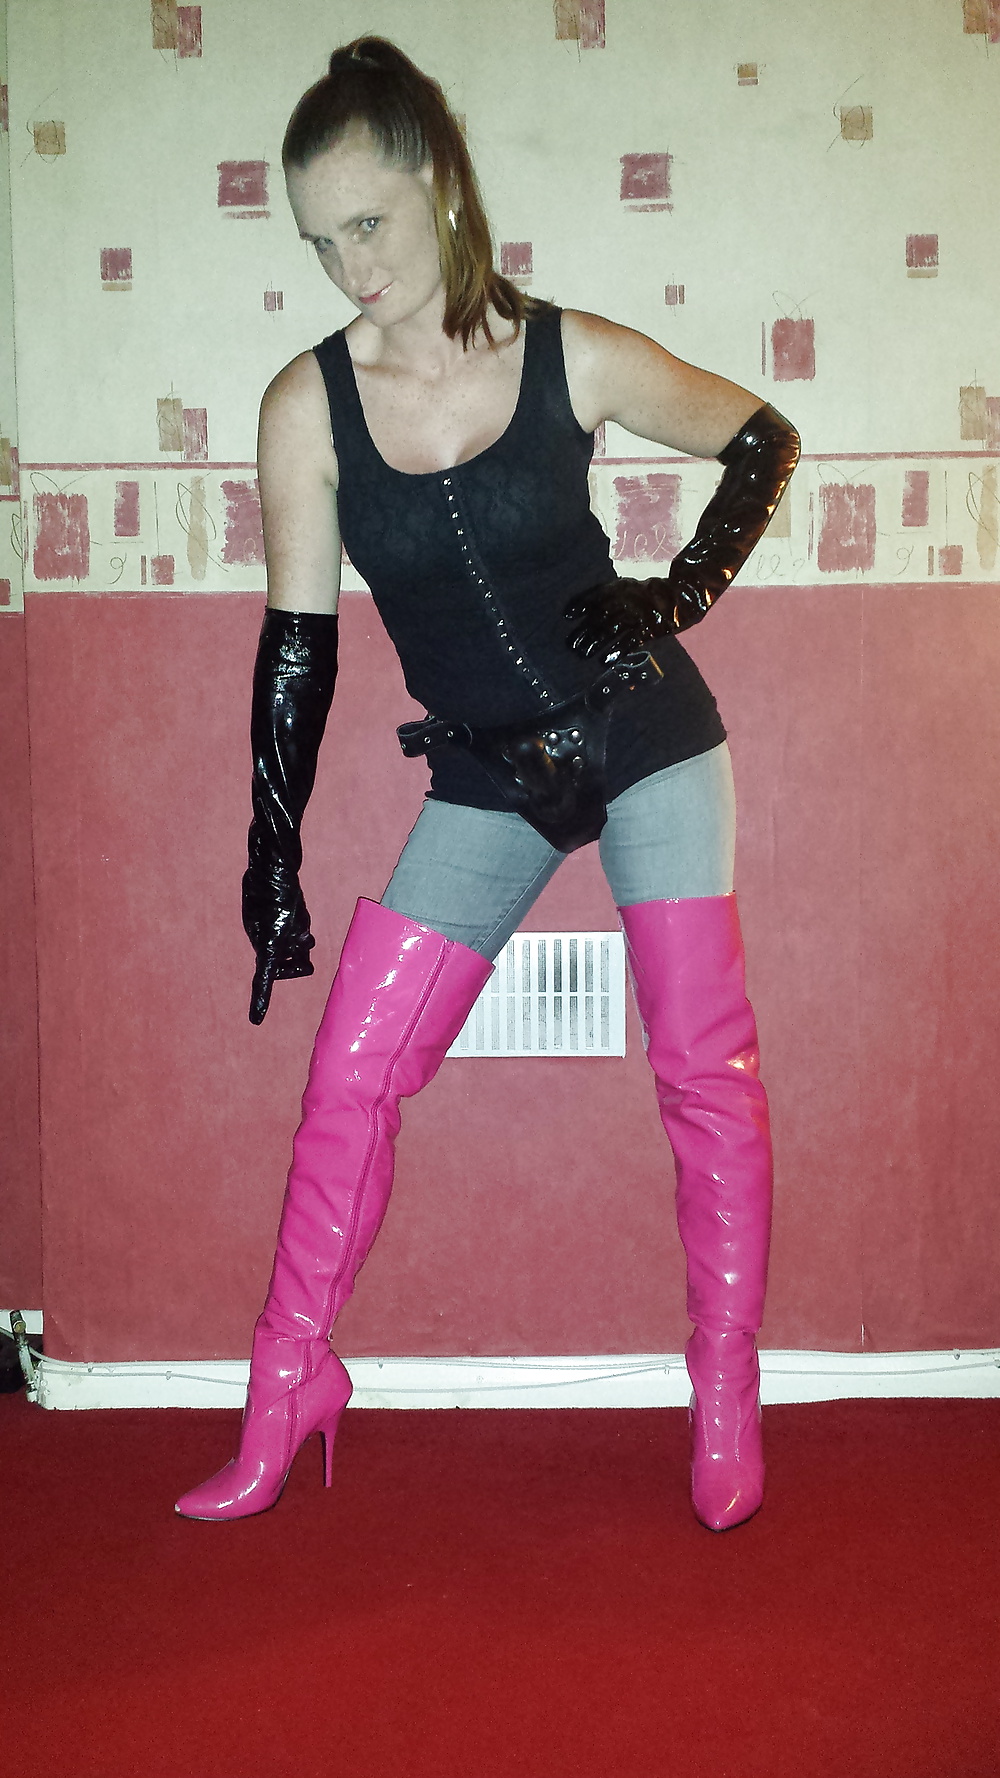 Strapon wearing mistress in pink thigh high boots #30016288